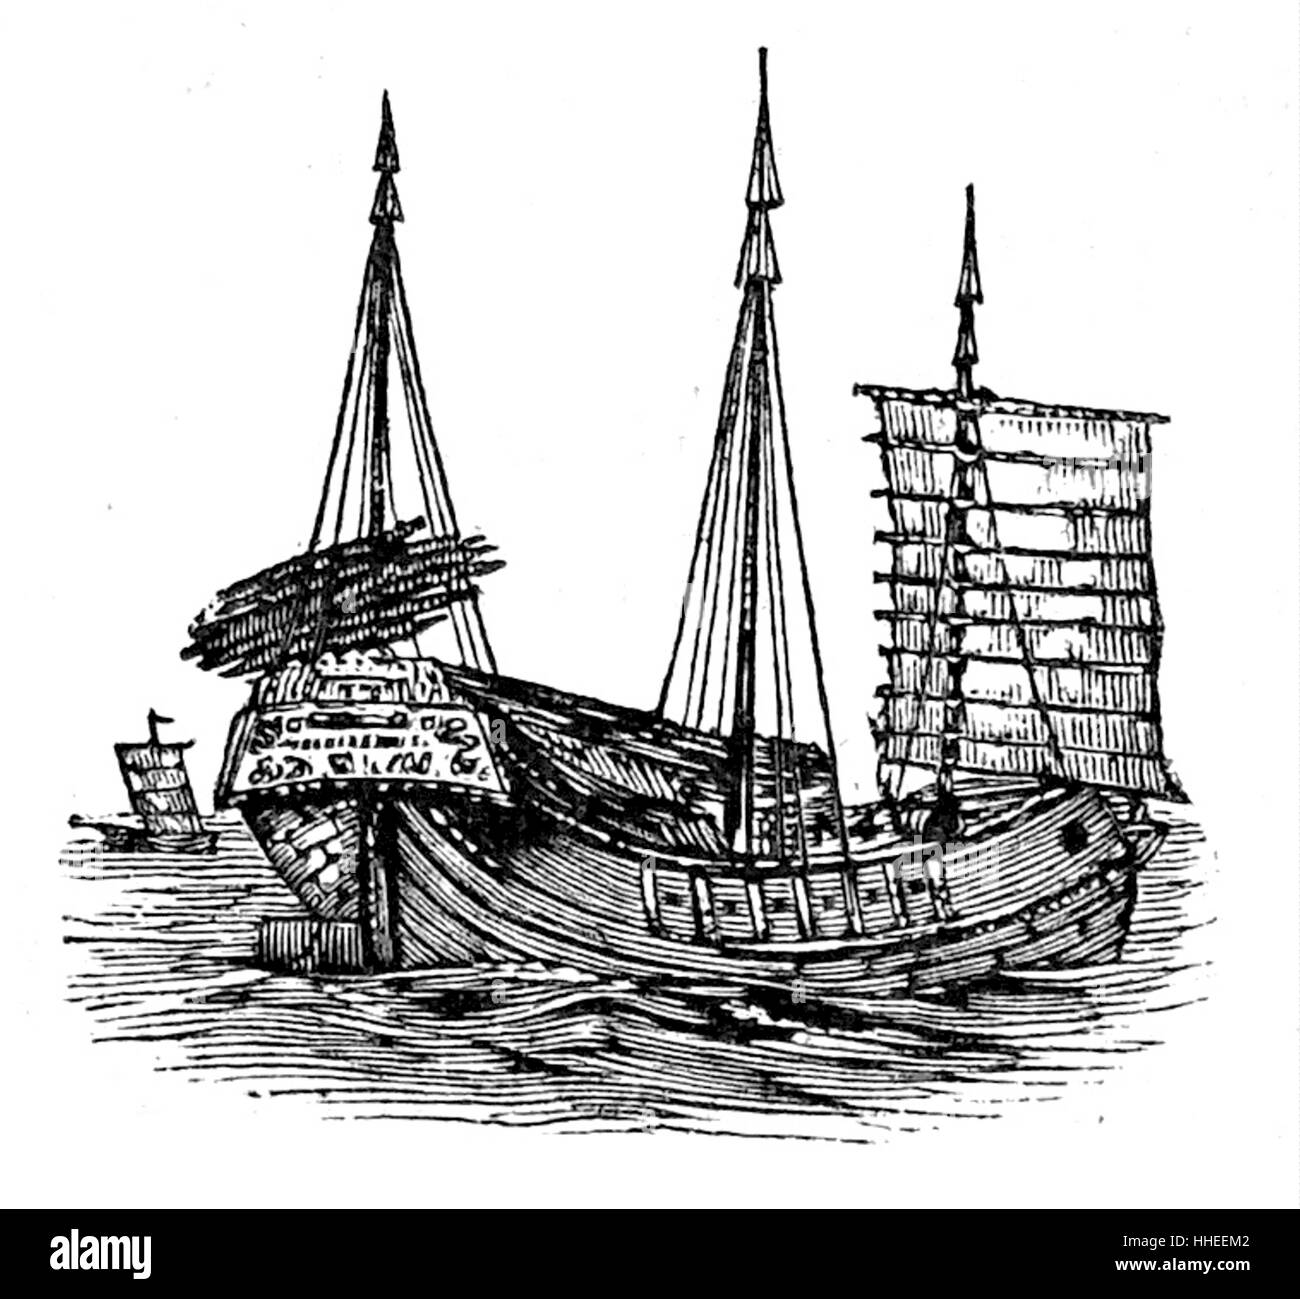 Engraving of a Chinese Junk, an ancient Chinese sailing ship design